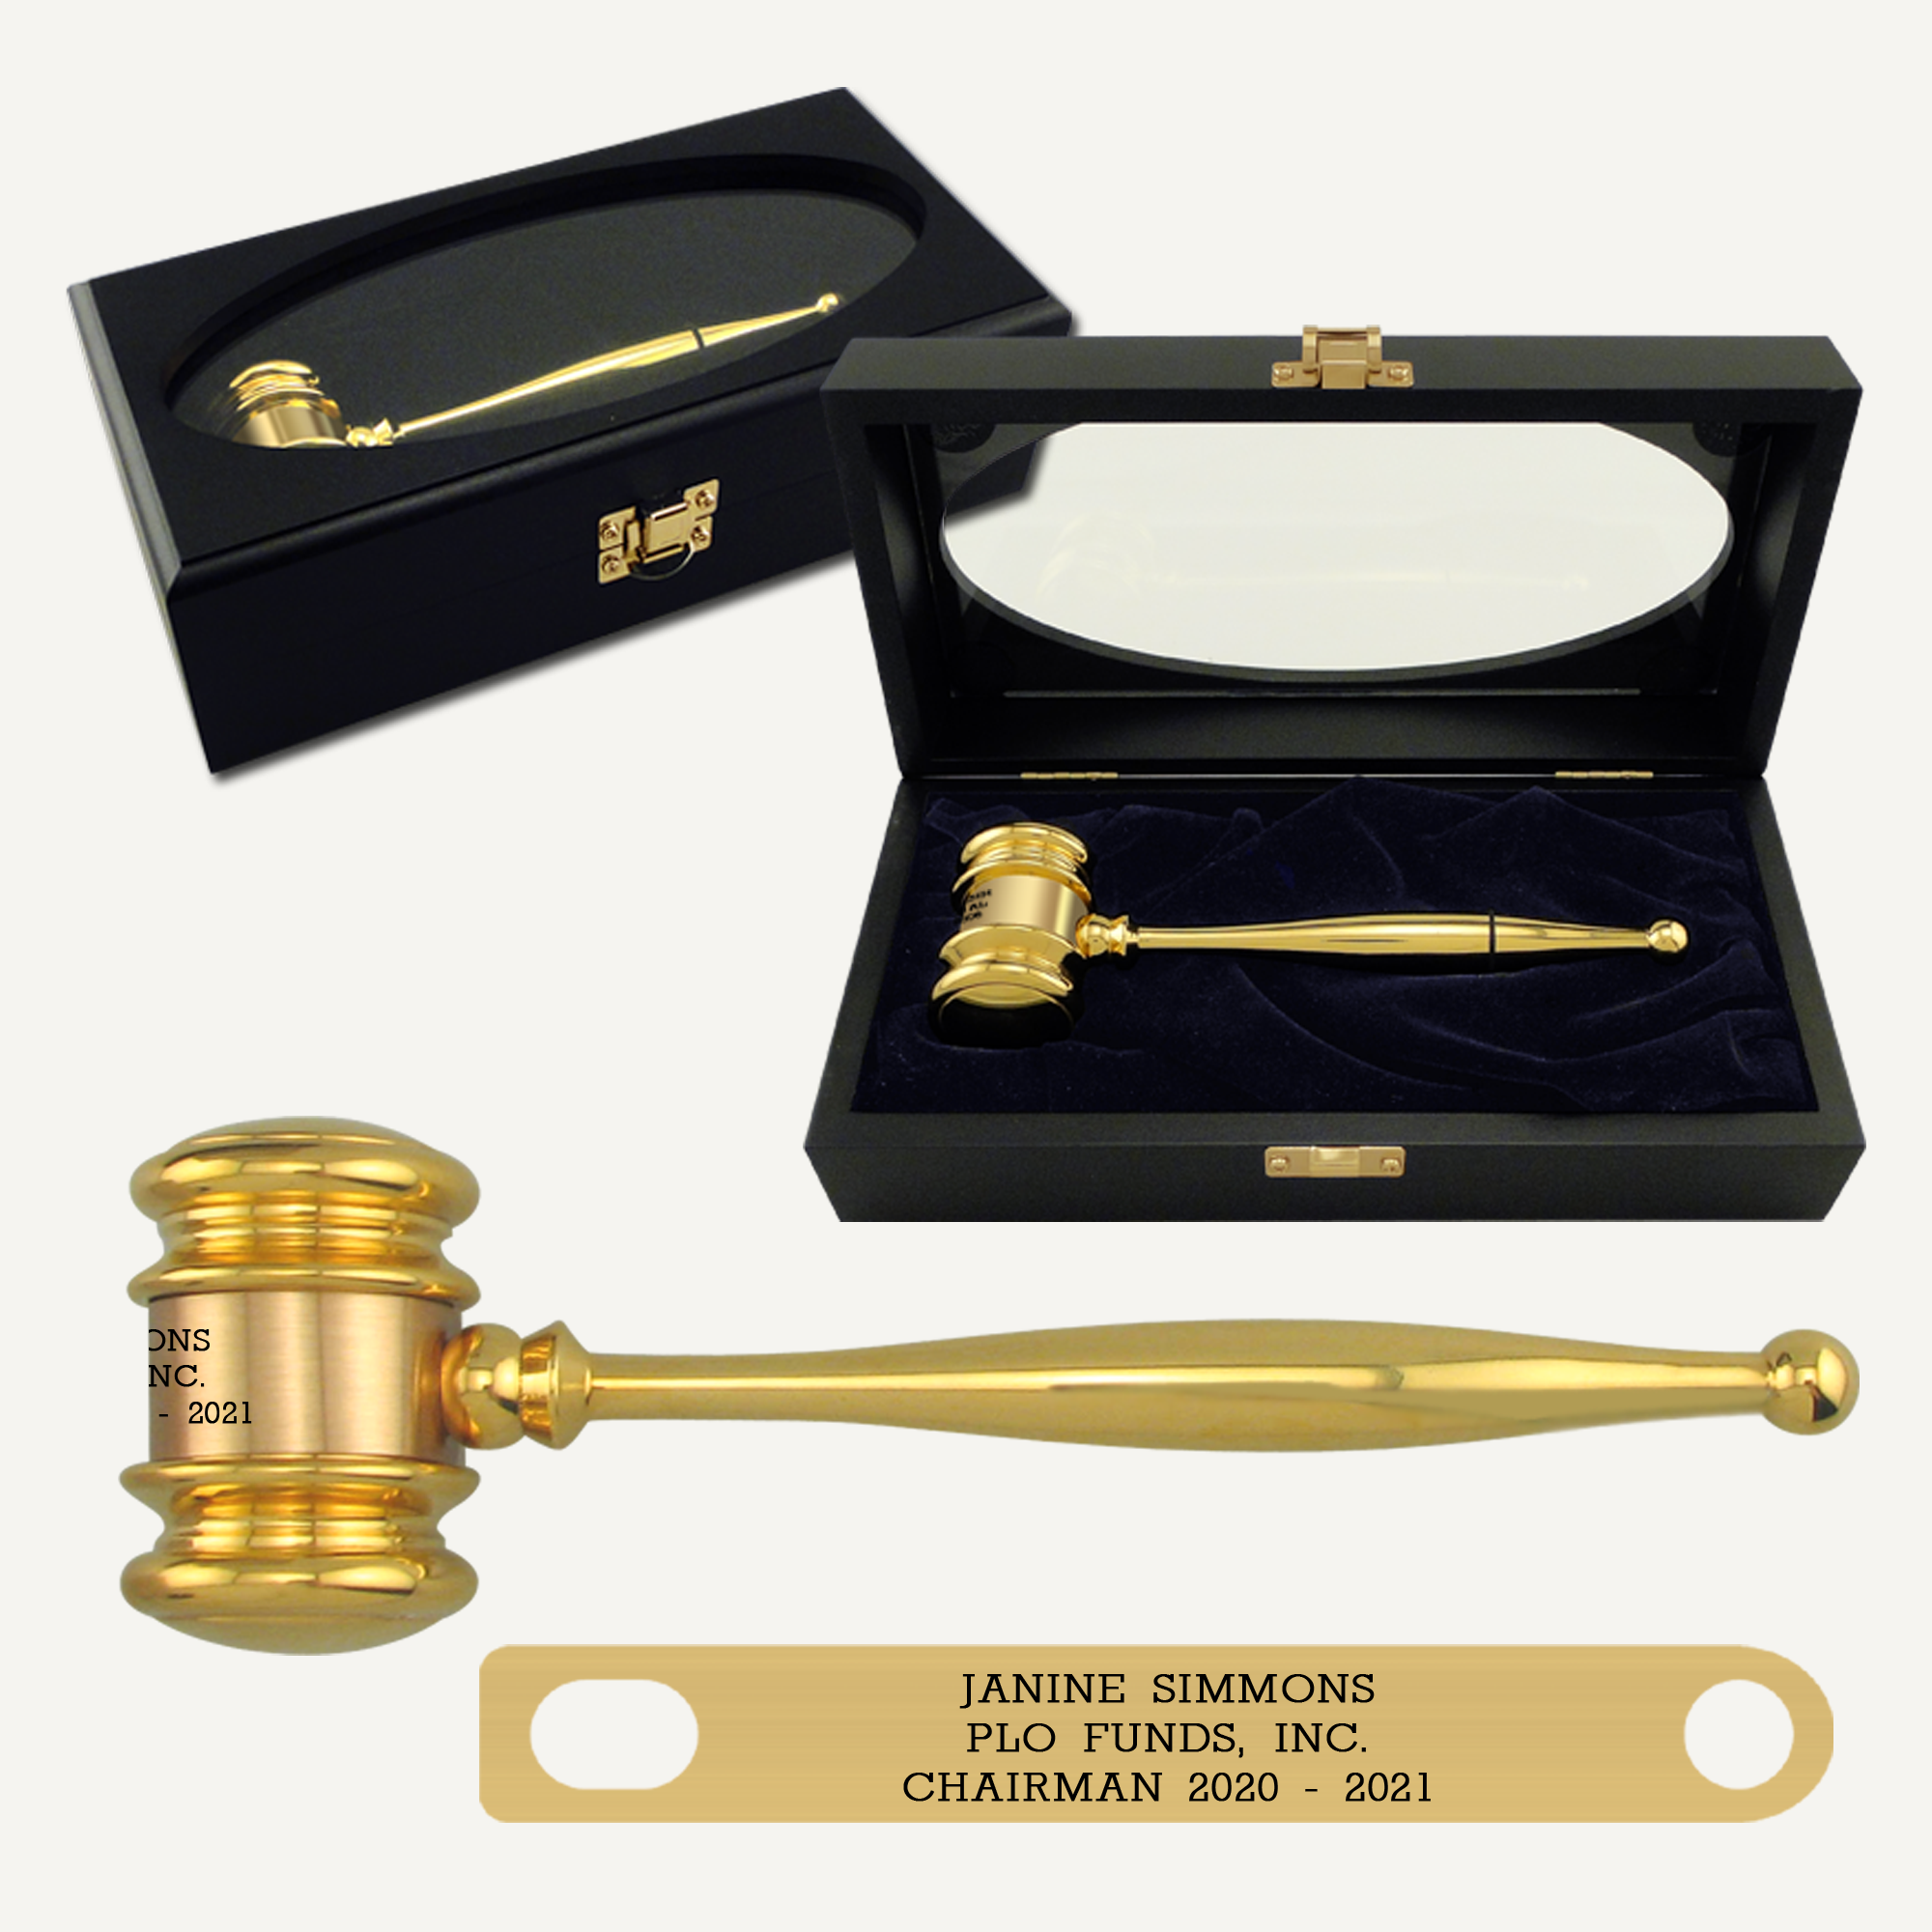 Gold Plated Ceremonial Railroad Spikes with Gift Boxes - Engraving, Awards  & Gifts